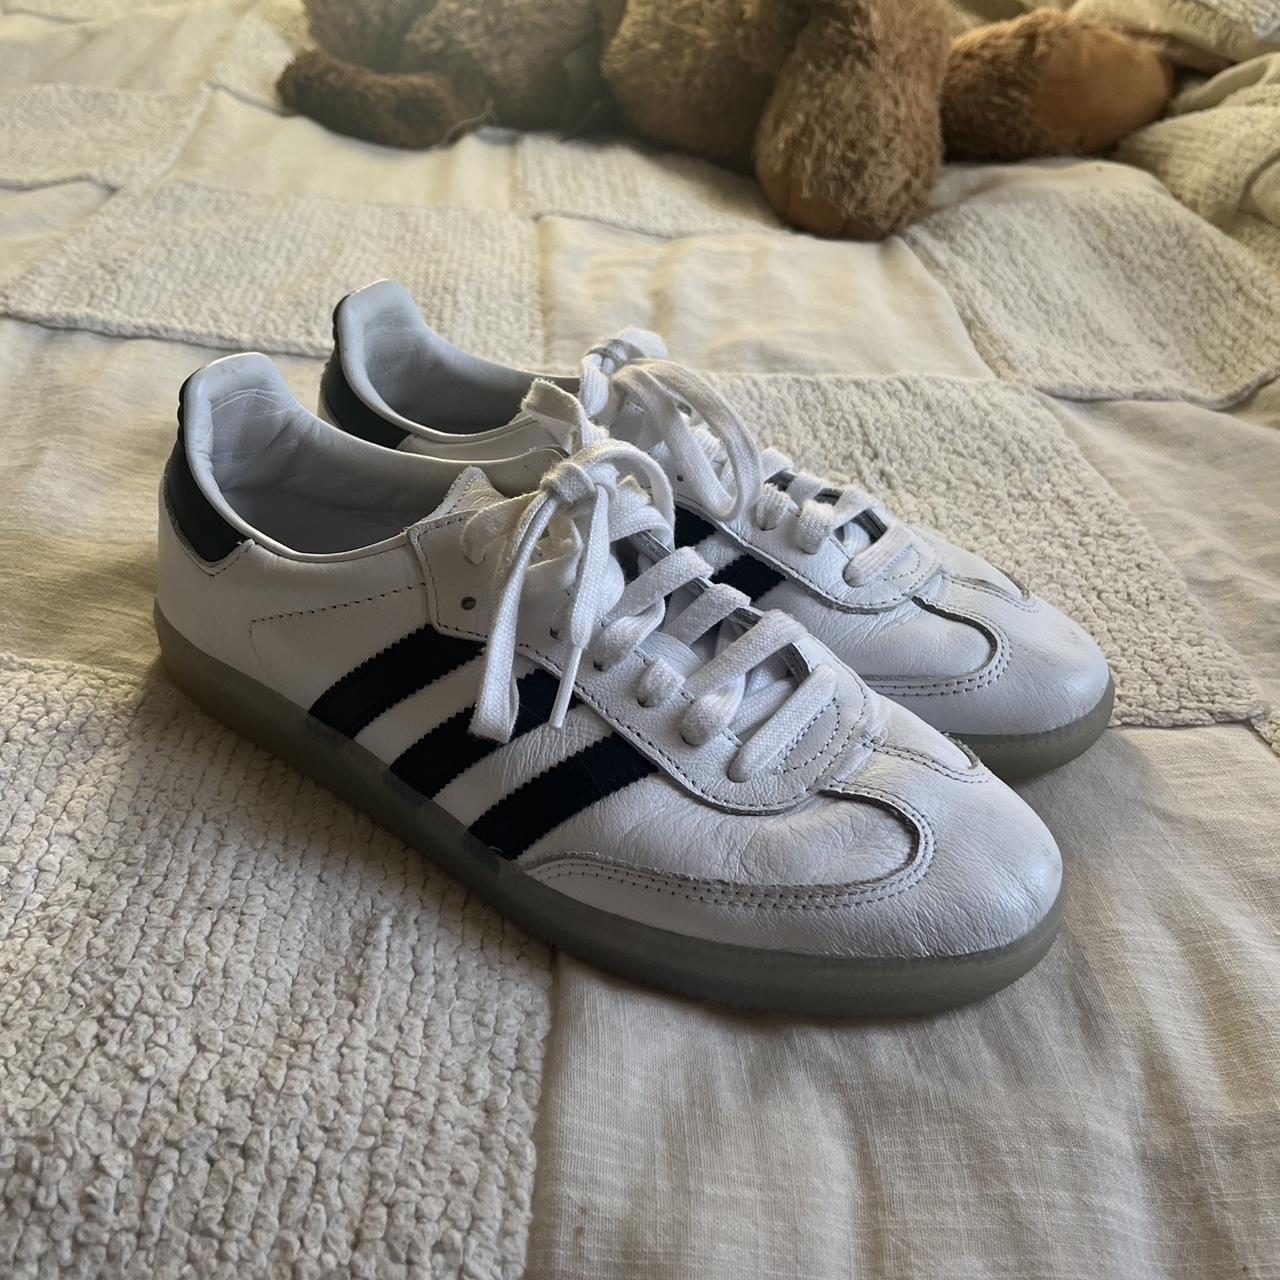 FREE SHIPPING Adidas gum sole white and black... - Depop